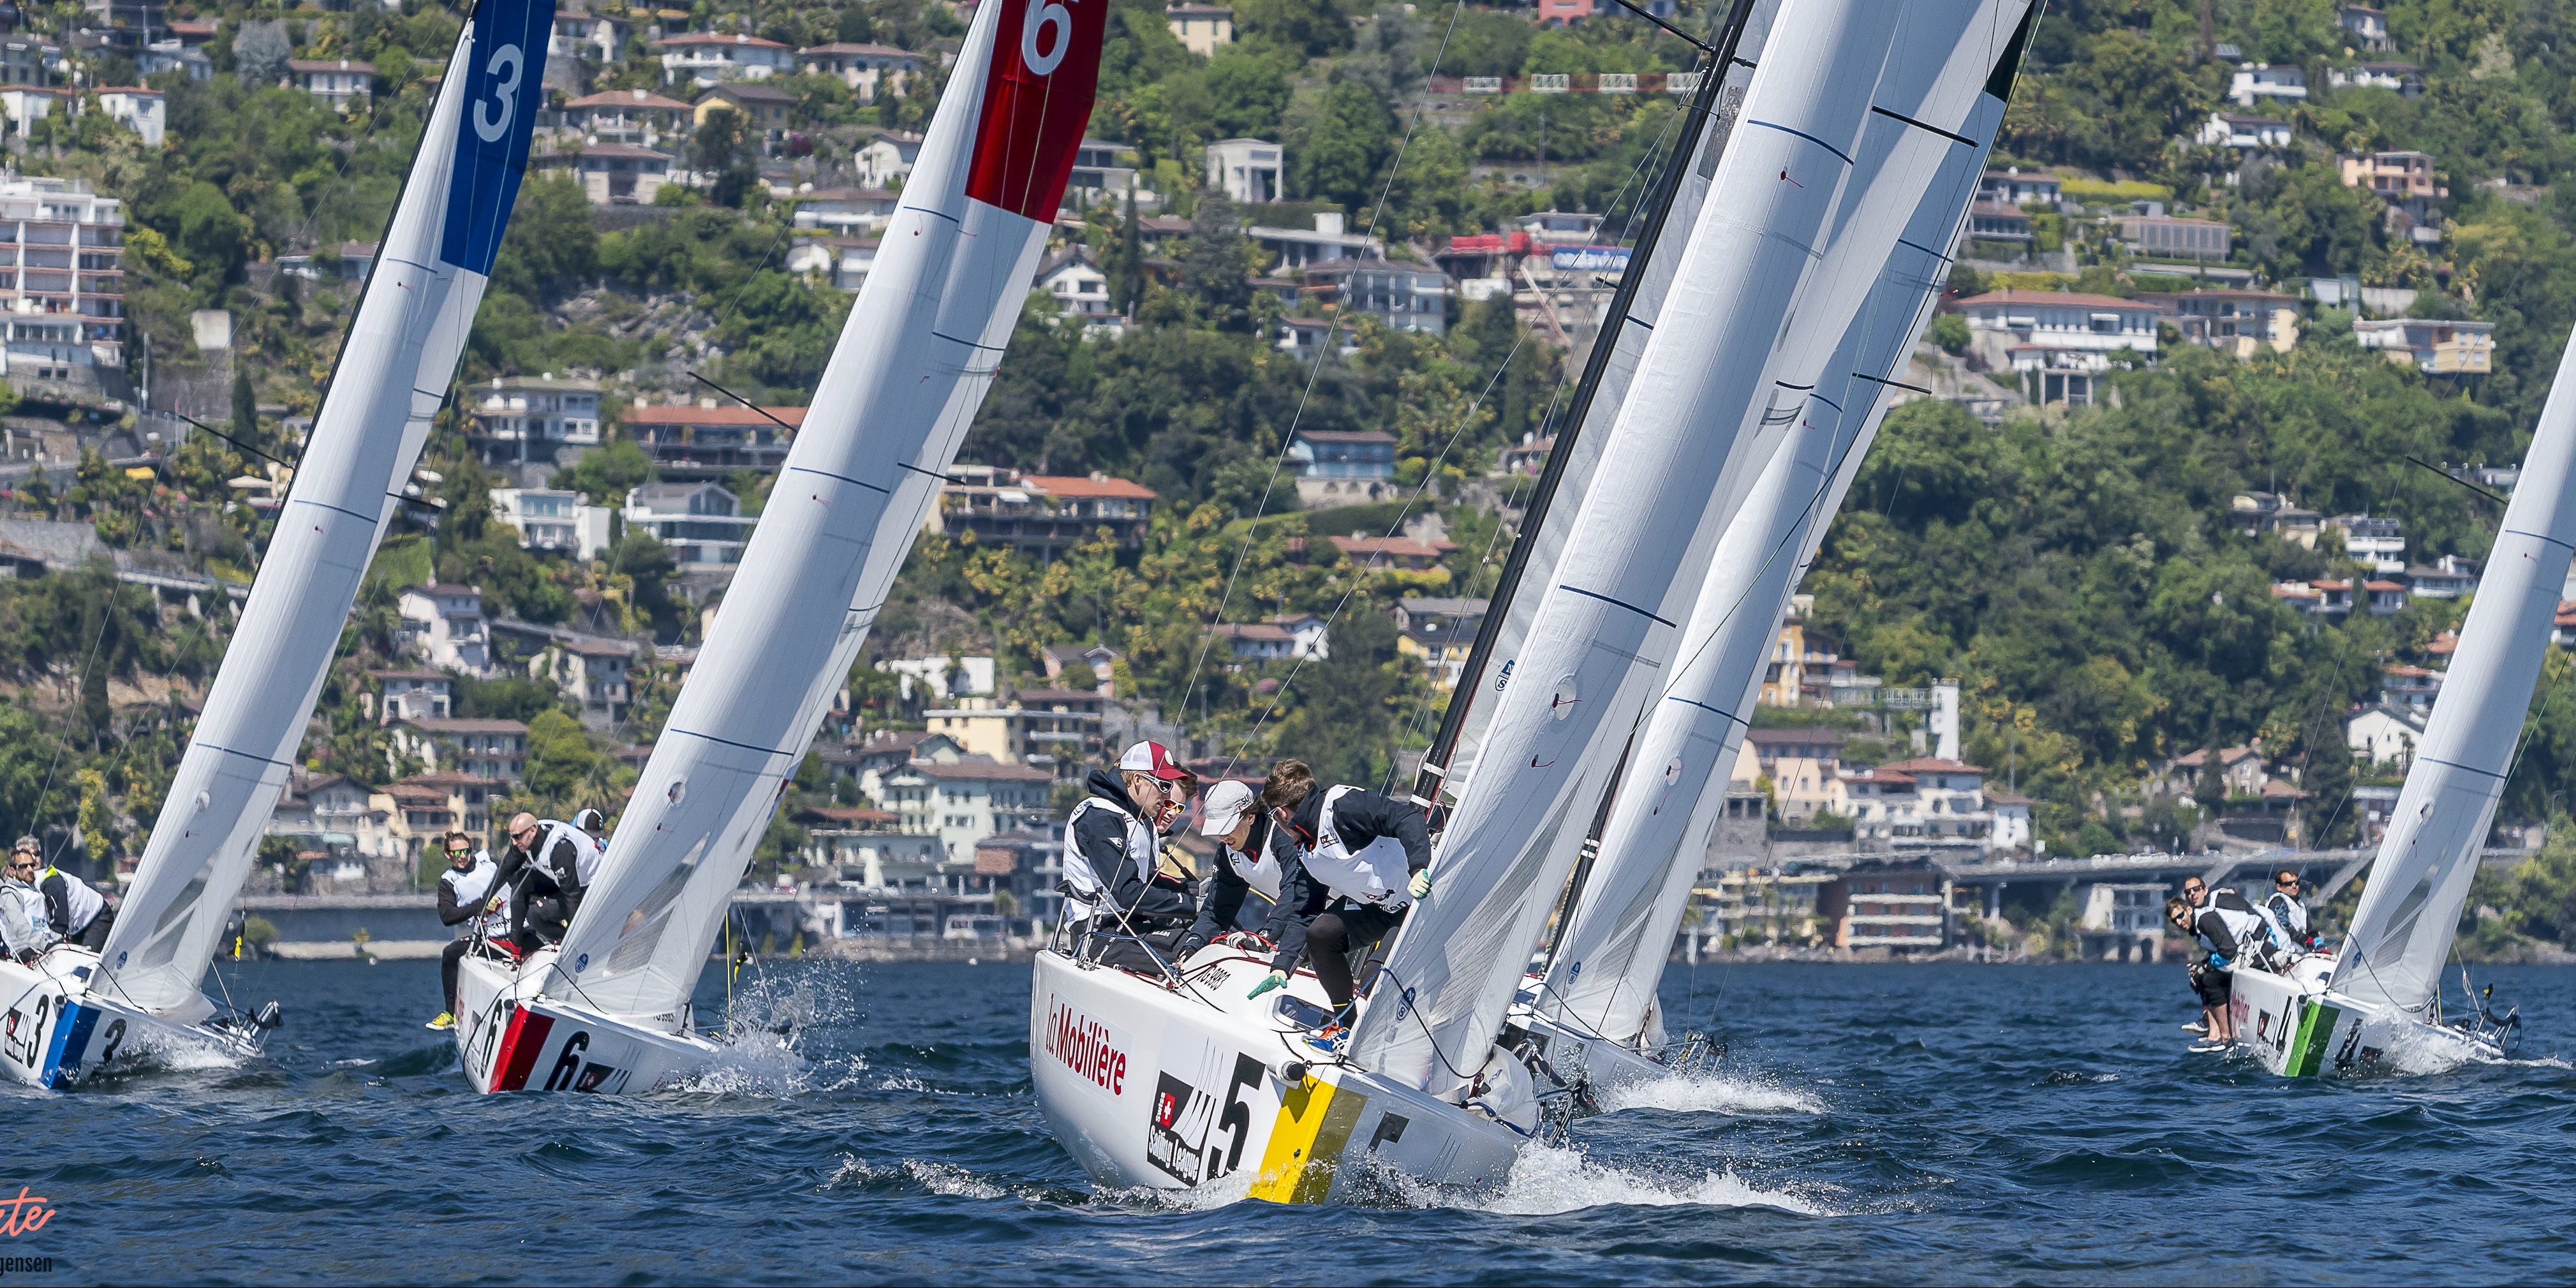  Swiss Sailing Super League  Act 1  YC Locarno  Final results